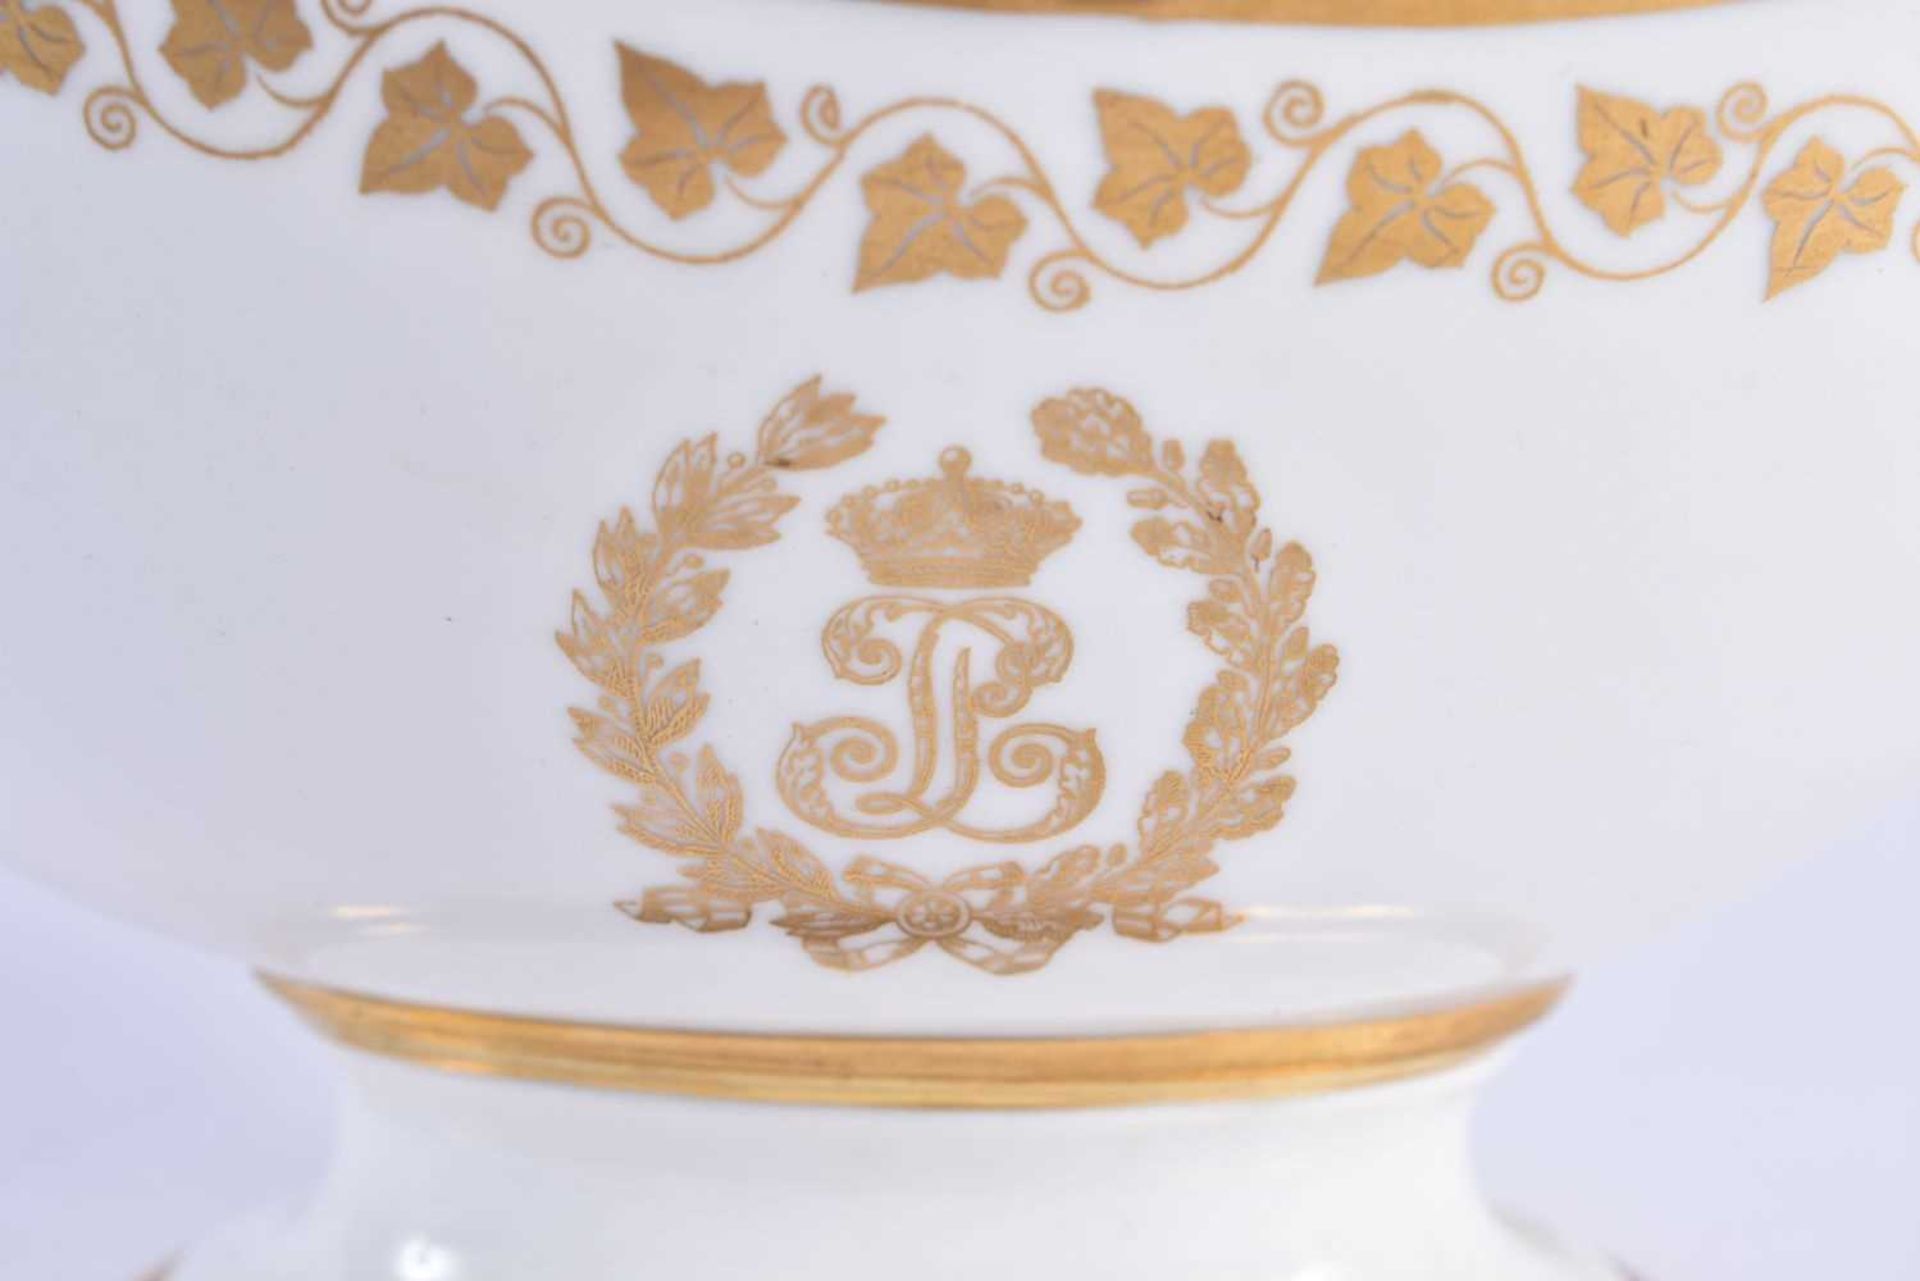 A LATE 19TH CENTURY FRENCH SEVRES PORCELAIN SAUCE BOAT painted with gilded flowers and trailing - Image 2 of 8